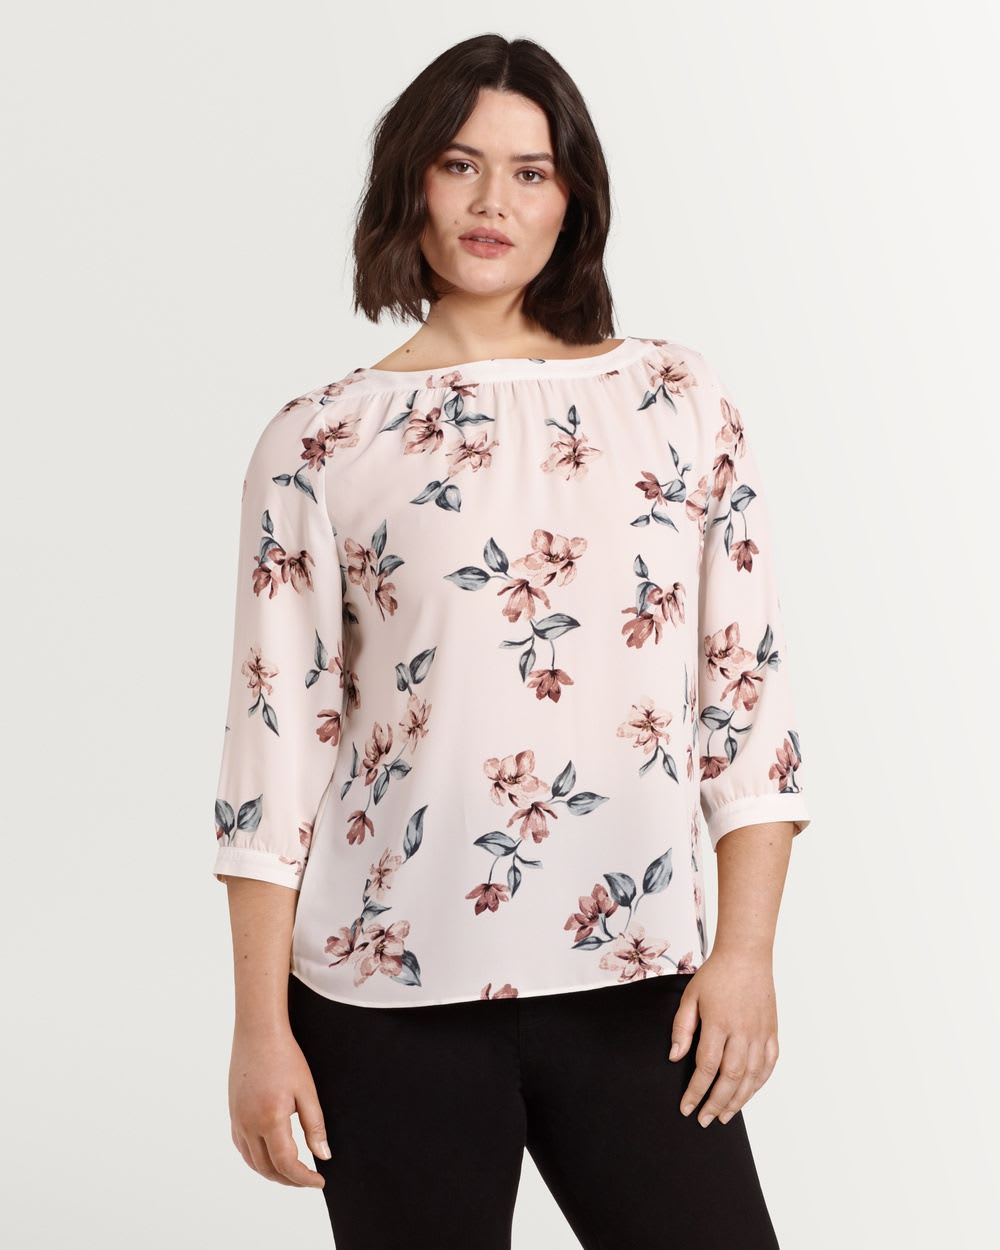 3/4 Sleeve Boat Neck with Band & Shirring Printed Blouse - Petite